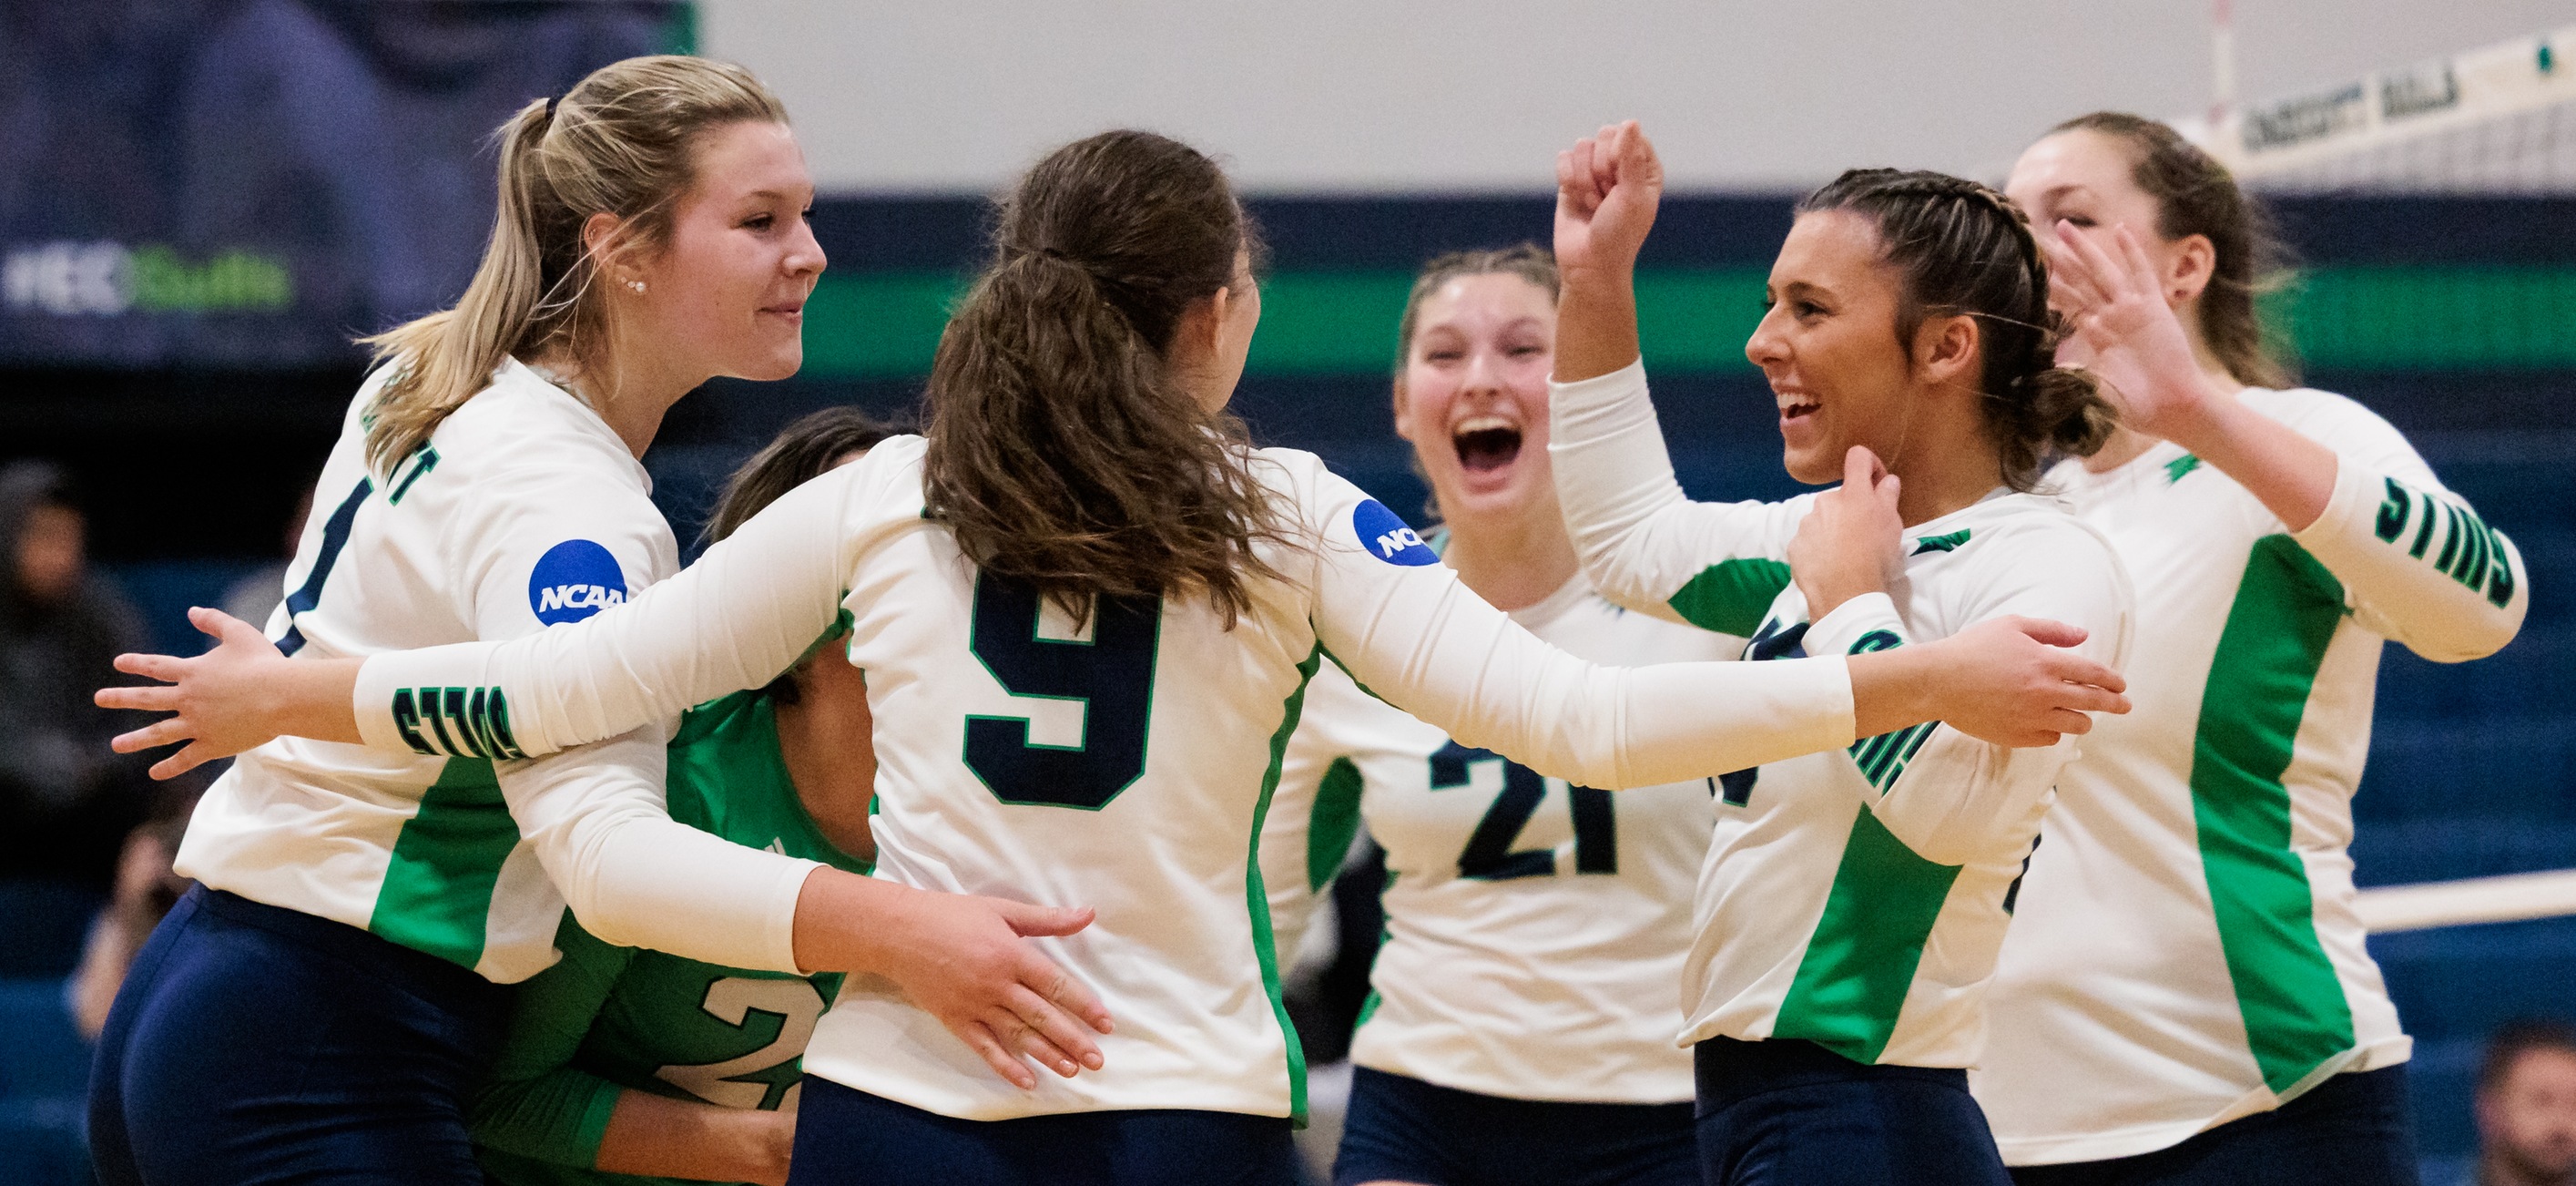 The women's volleyball team celebrates a pivotal point during the CCC semifinal match against WNE.